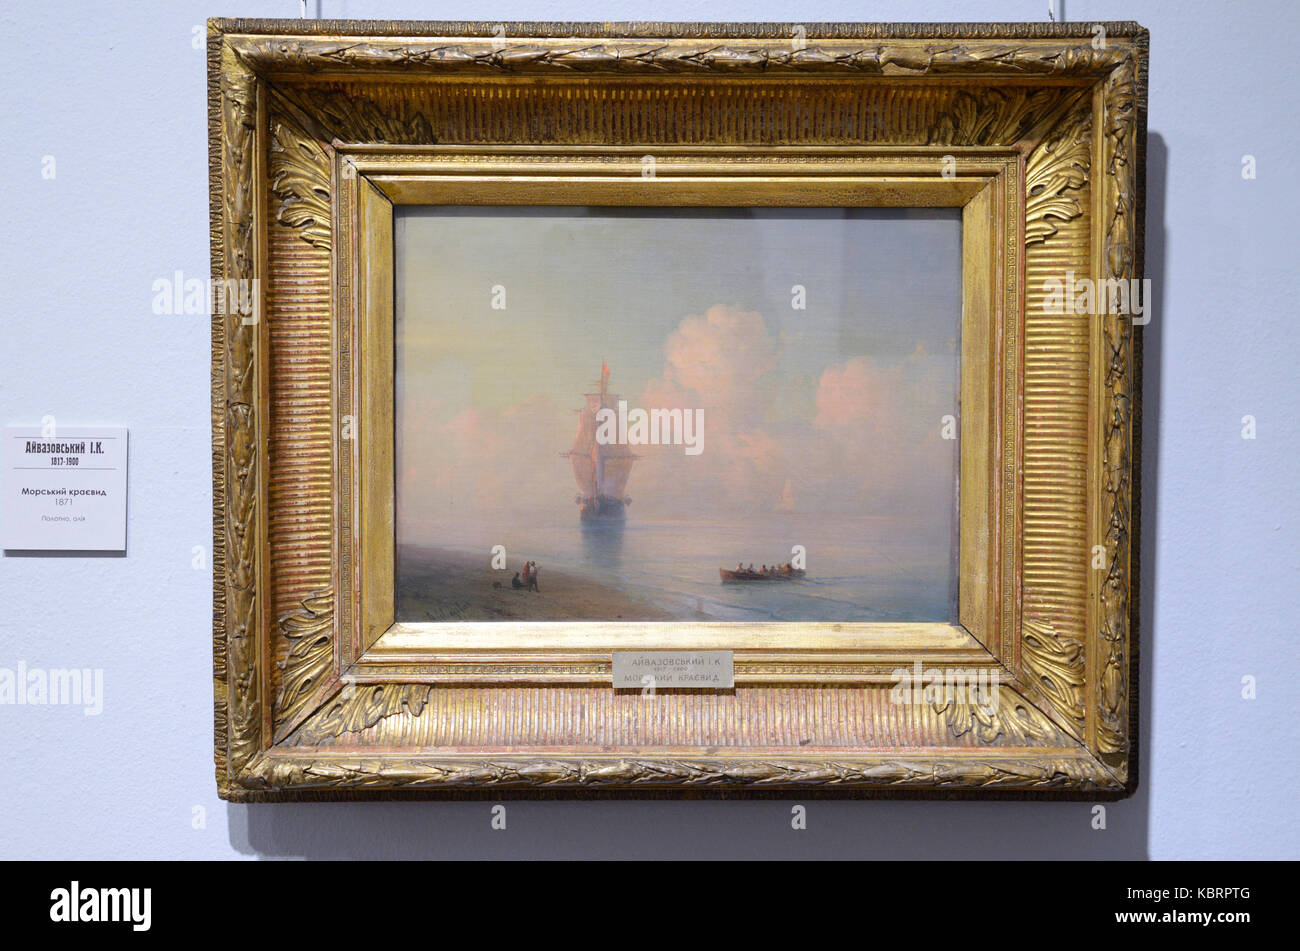 Aivazovsky I., “Seascape”, 1871. An exhibition of paintings 'Genius and the sea”. The National Museum 'Kyiv Art Gallery'. Stock Photo